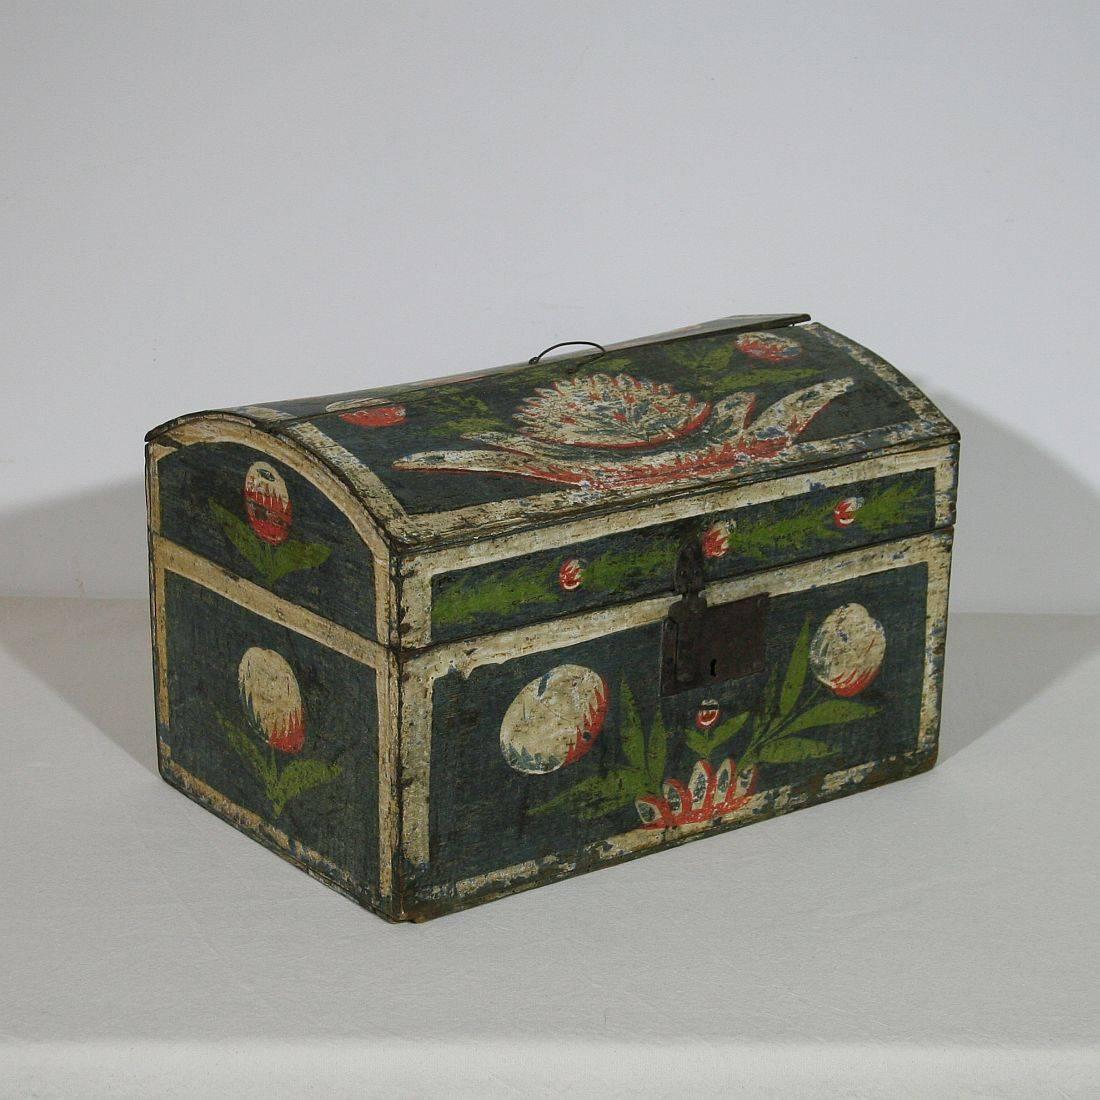 Beautiful painted wooden weddingbox with its original decor and wrought iron lock (no key). Weathered but stunning color.
  